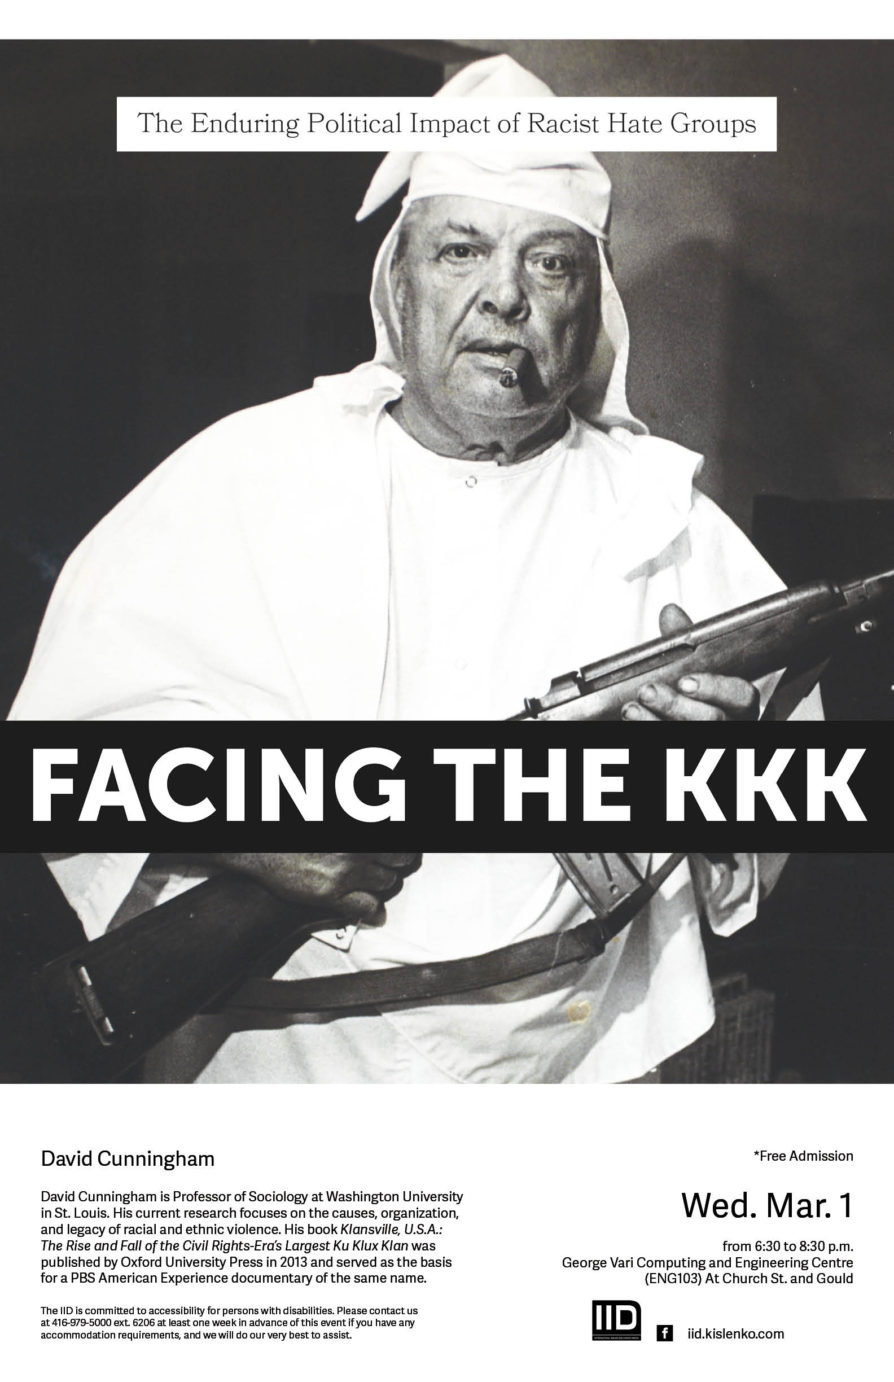 Facing the KKK: The Enduring Political Impact of Racist Hate Groups – Wednesday, March 1st, 2017